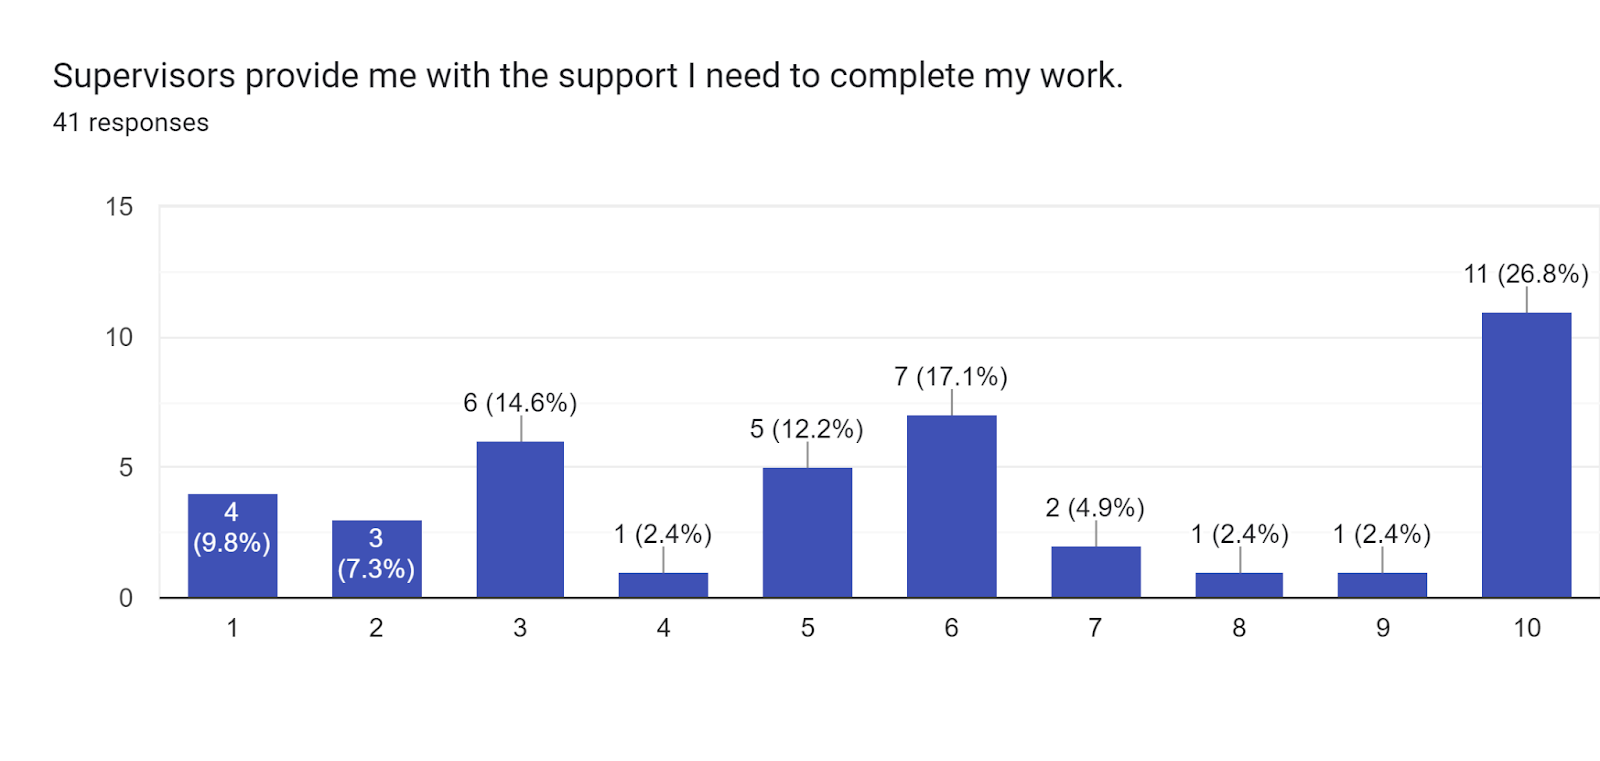 Forms response chart. Question title: Supervisors provide me with the support I need to complete my work.. Number of responses: 41 responses.